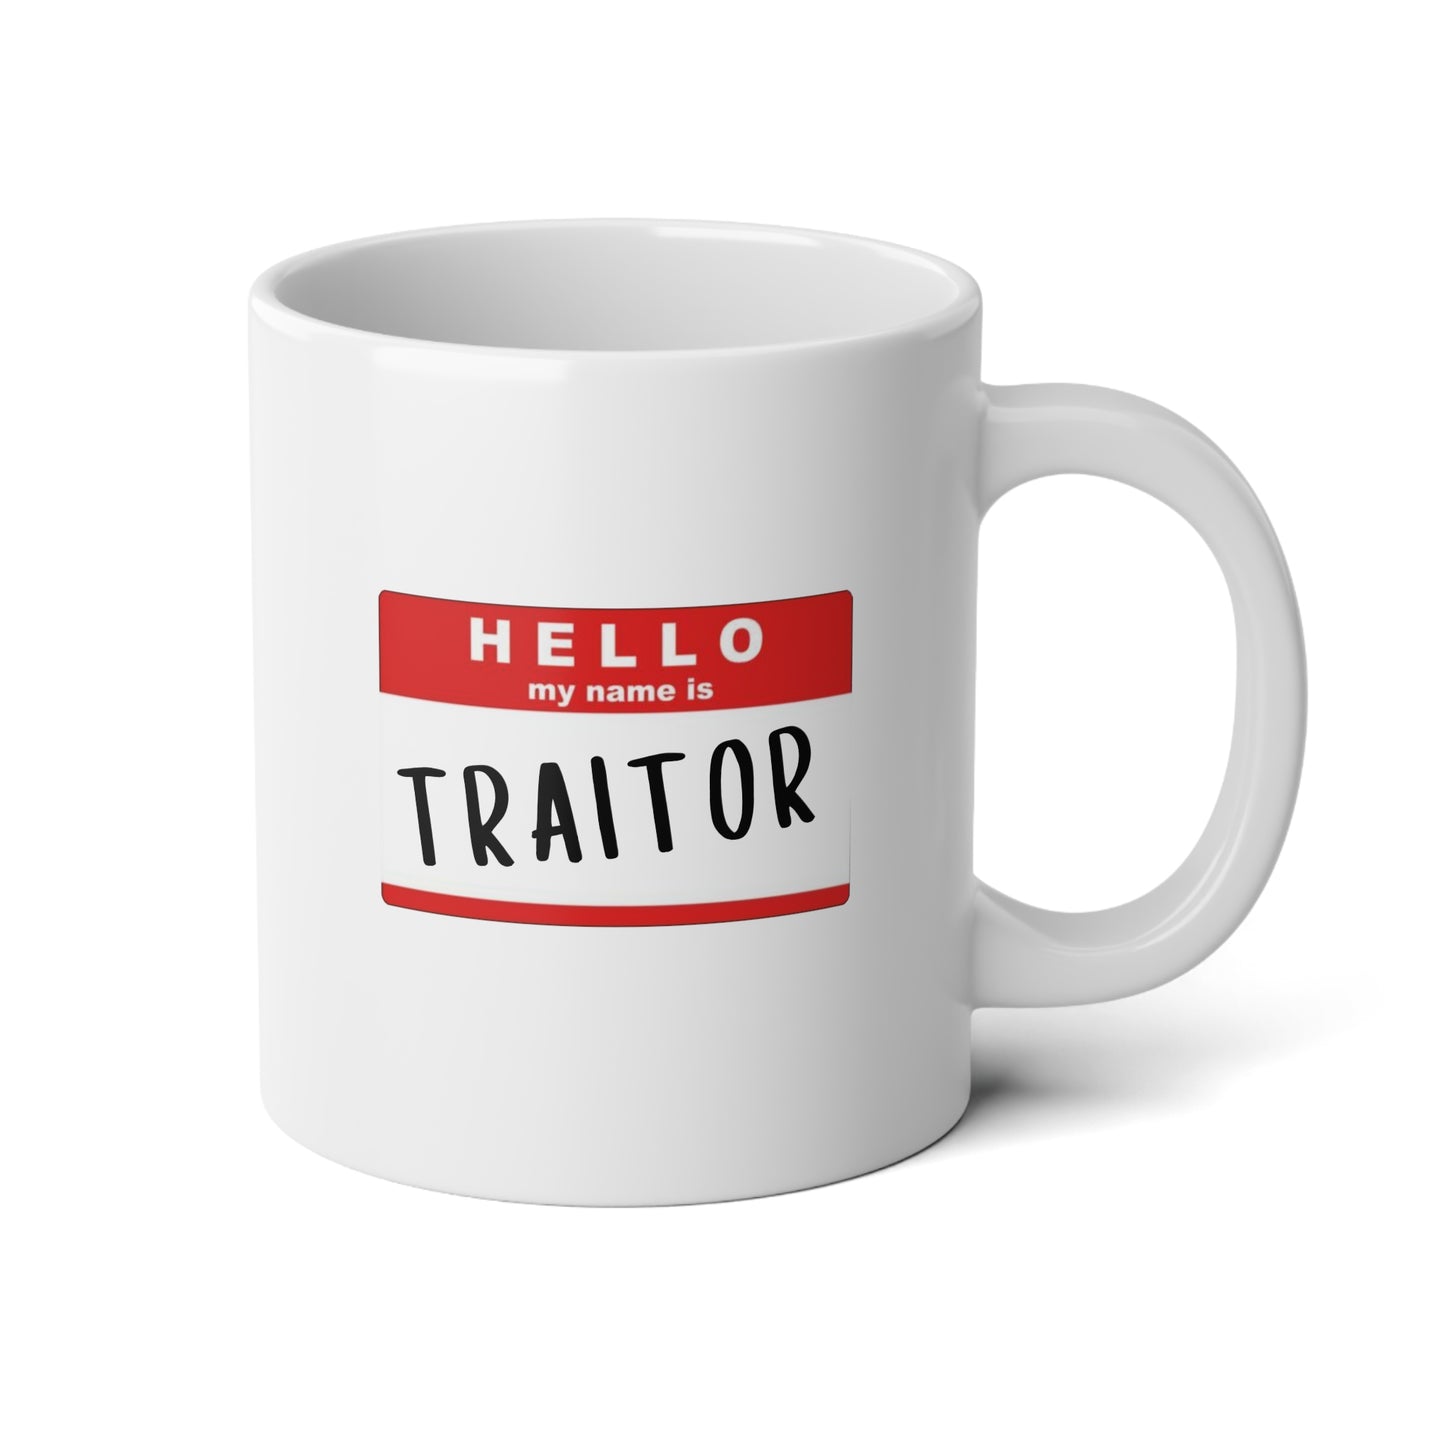 Hello My Name Is Traitor 20oz white funny large coffee mug gift for coworker colleague work promotion leaving goodbye new job congrats waveywares wavey wares wavywares wavy wares